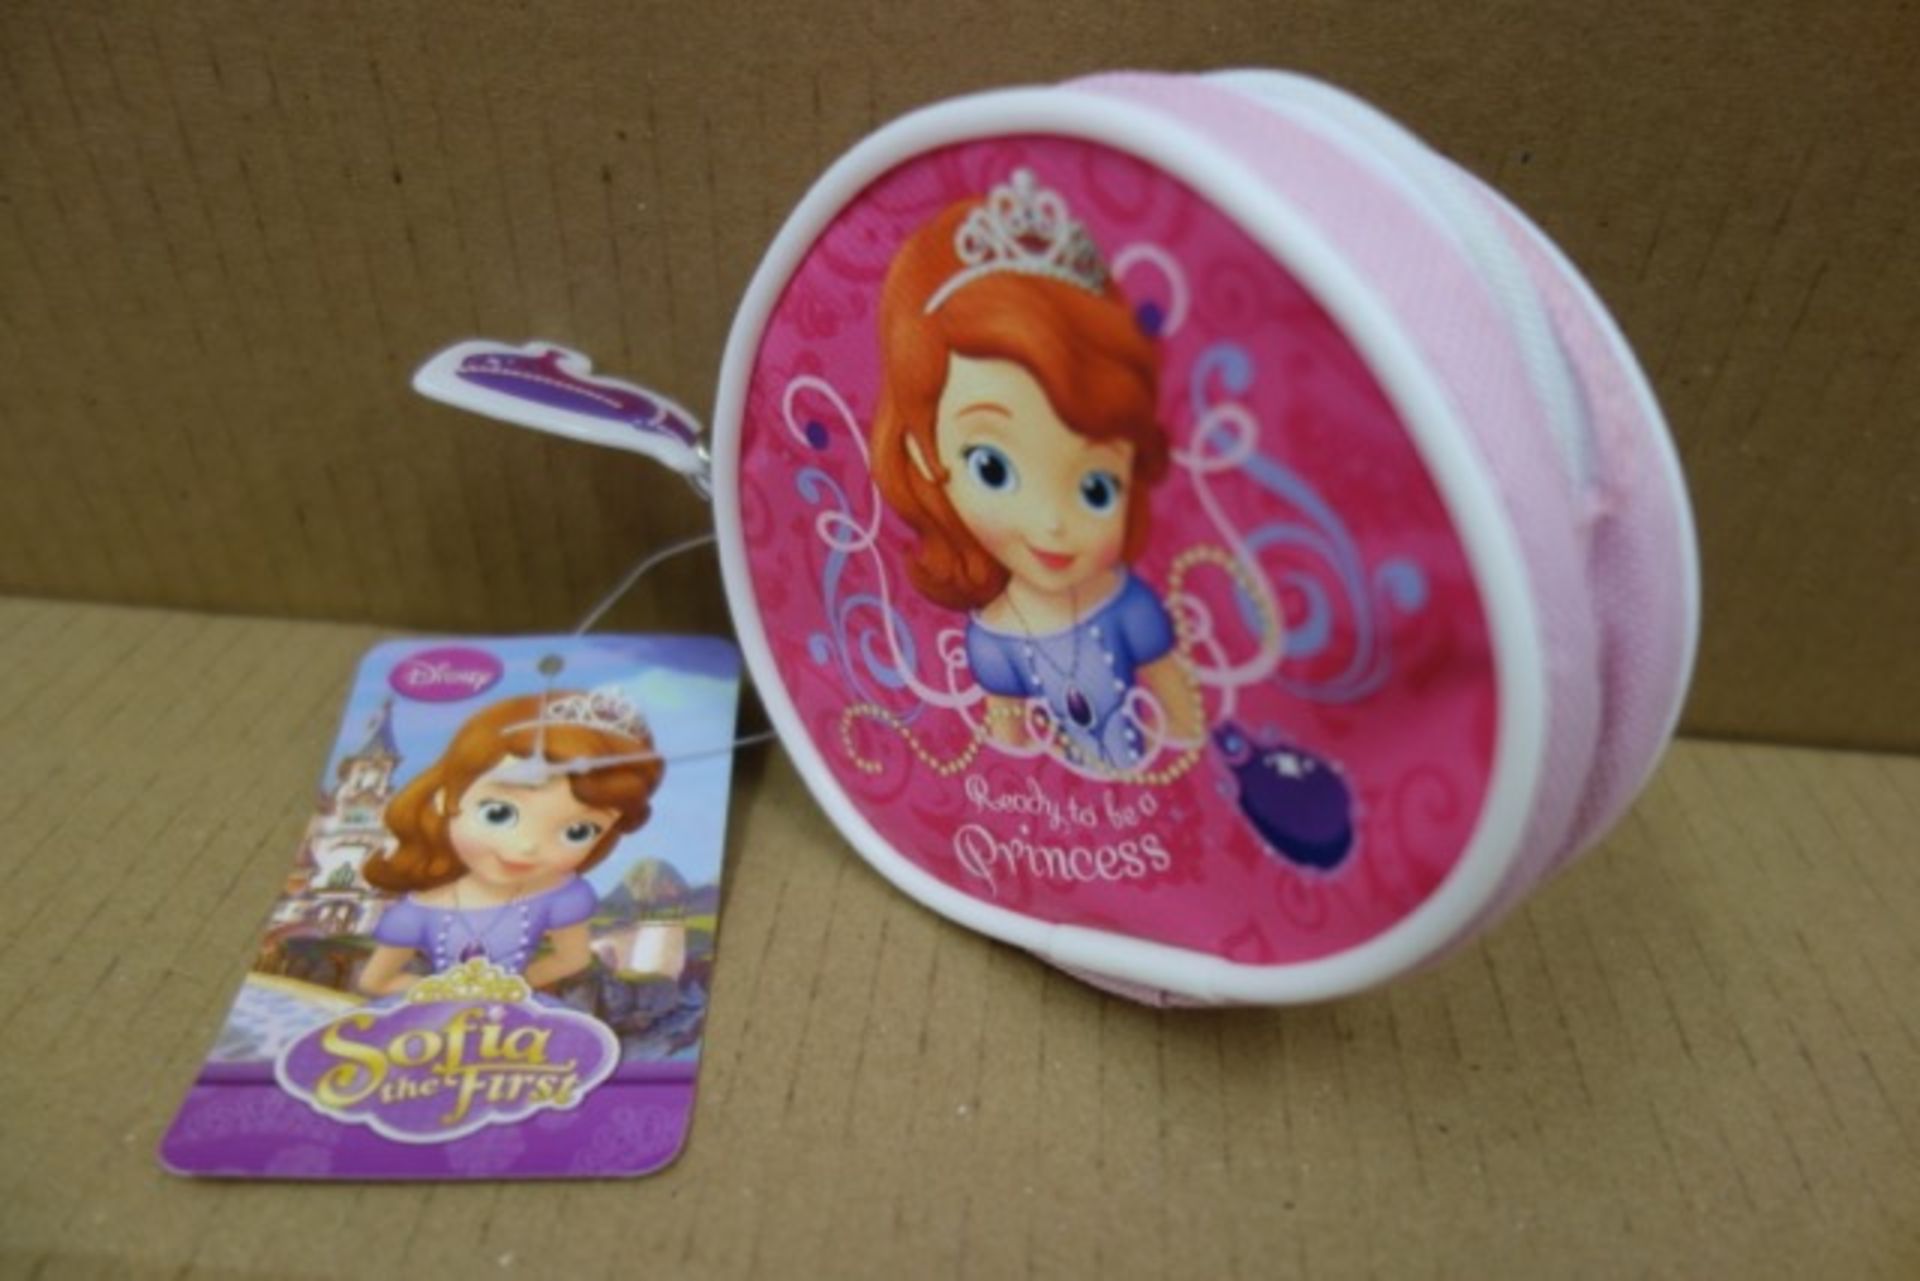 144 x Disney Sofia the First Coin Purse's. 'Ready to be a Princess'. RRP £4.99 each, giving this lot